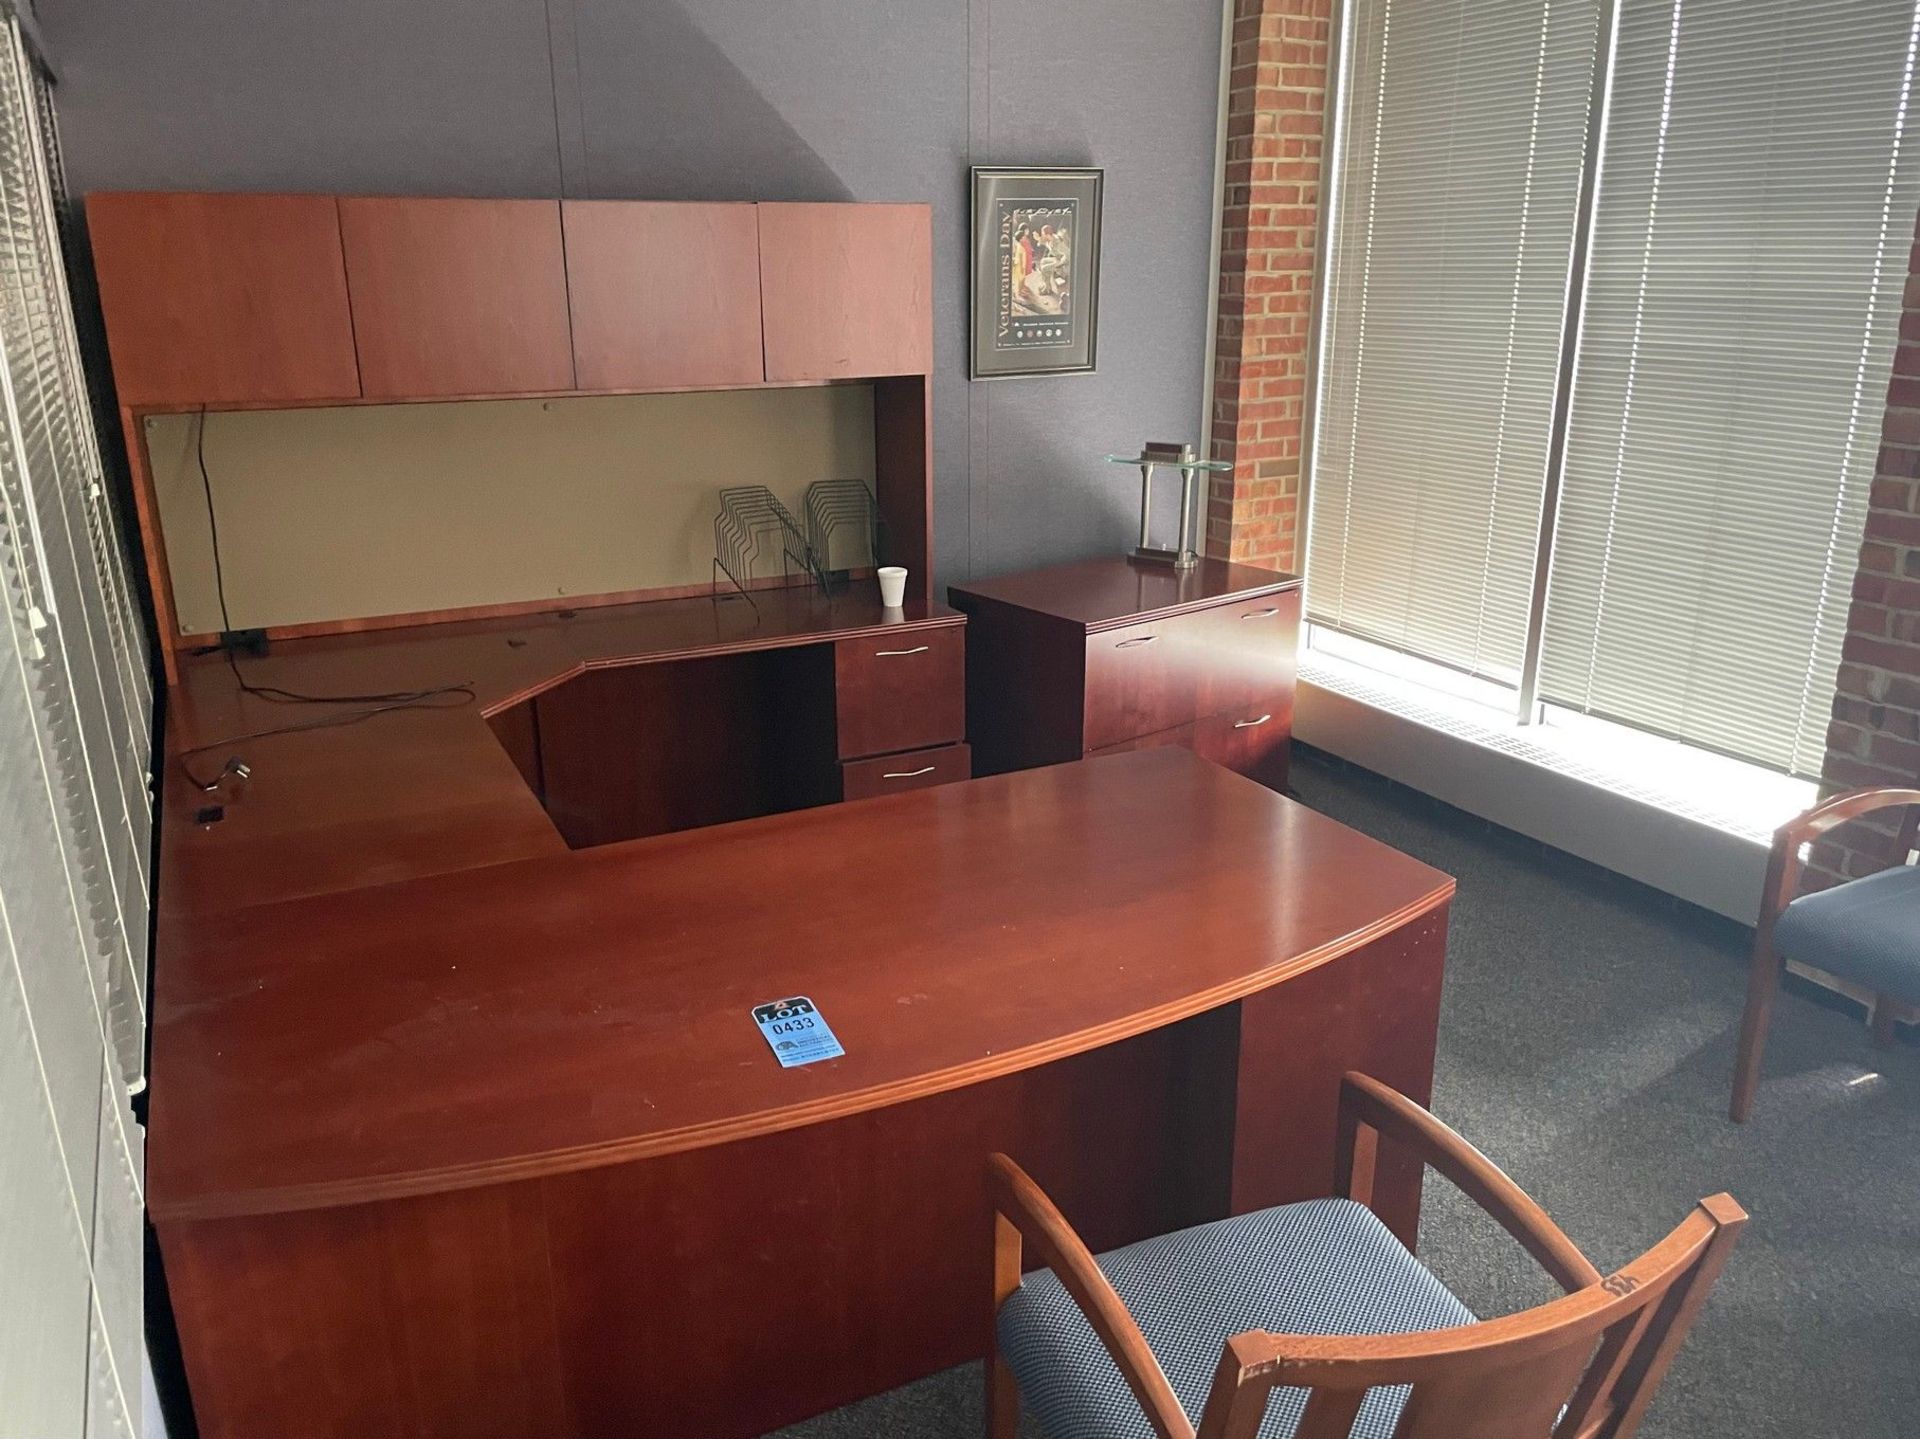 (LOT) EXECUTIVE OFFICE WITH U-SHAPED DESK, 3' DIAMETER TABLE, 2-DRAWER CABINET, (4) CHAIRS - Image 2 of 3